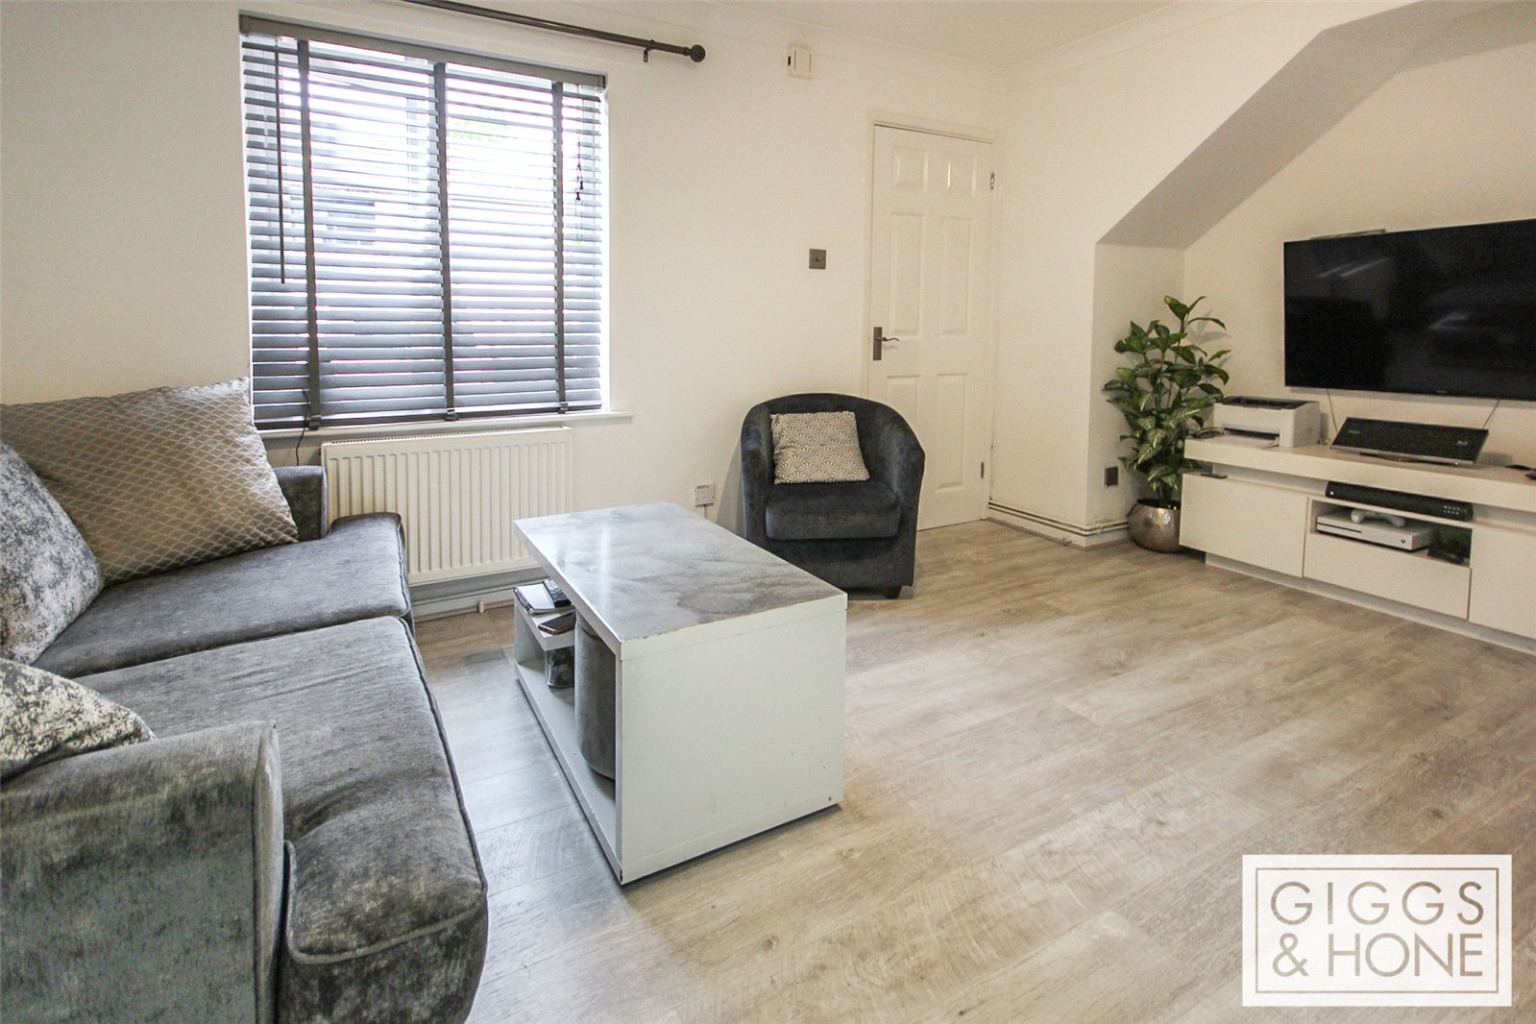 Offered for sale with no upper chain and in immaculate condition this superb one bedroom maisonette would make an ideal purchase for a first time buyer or investor.